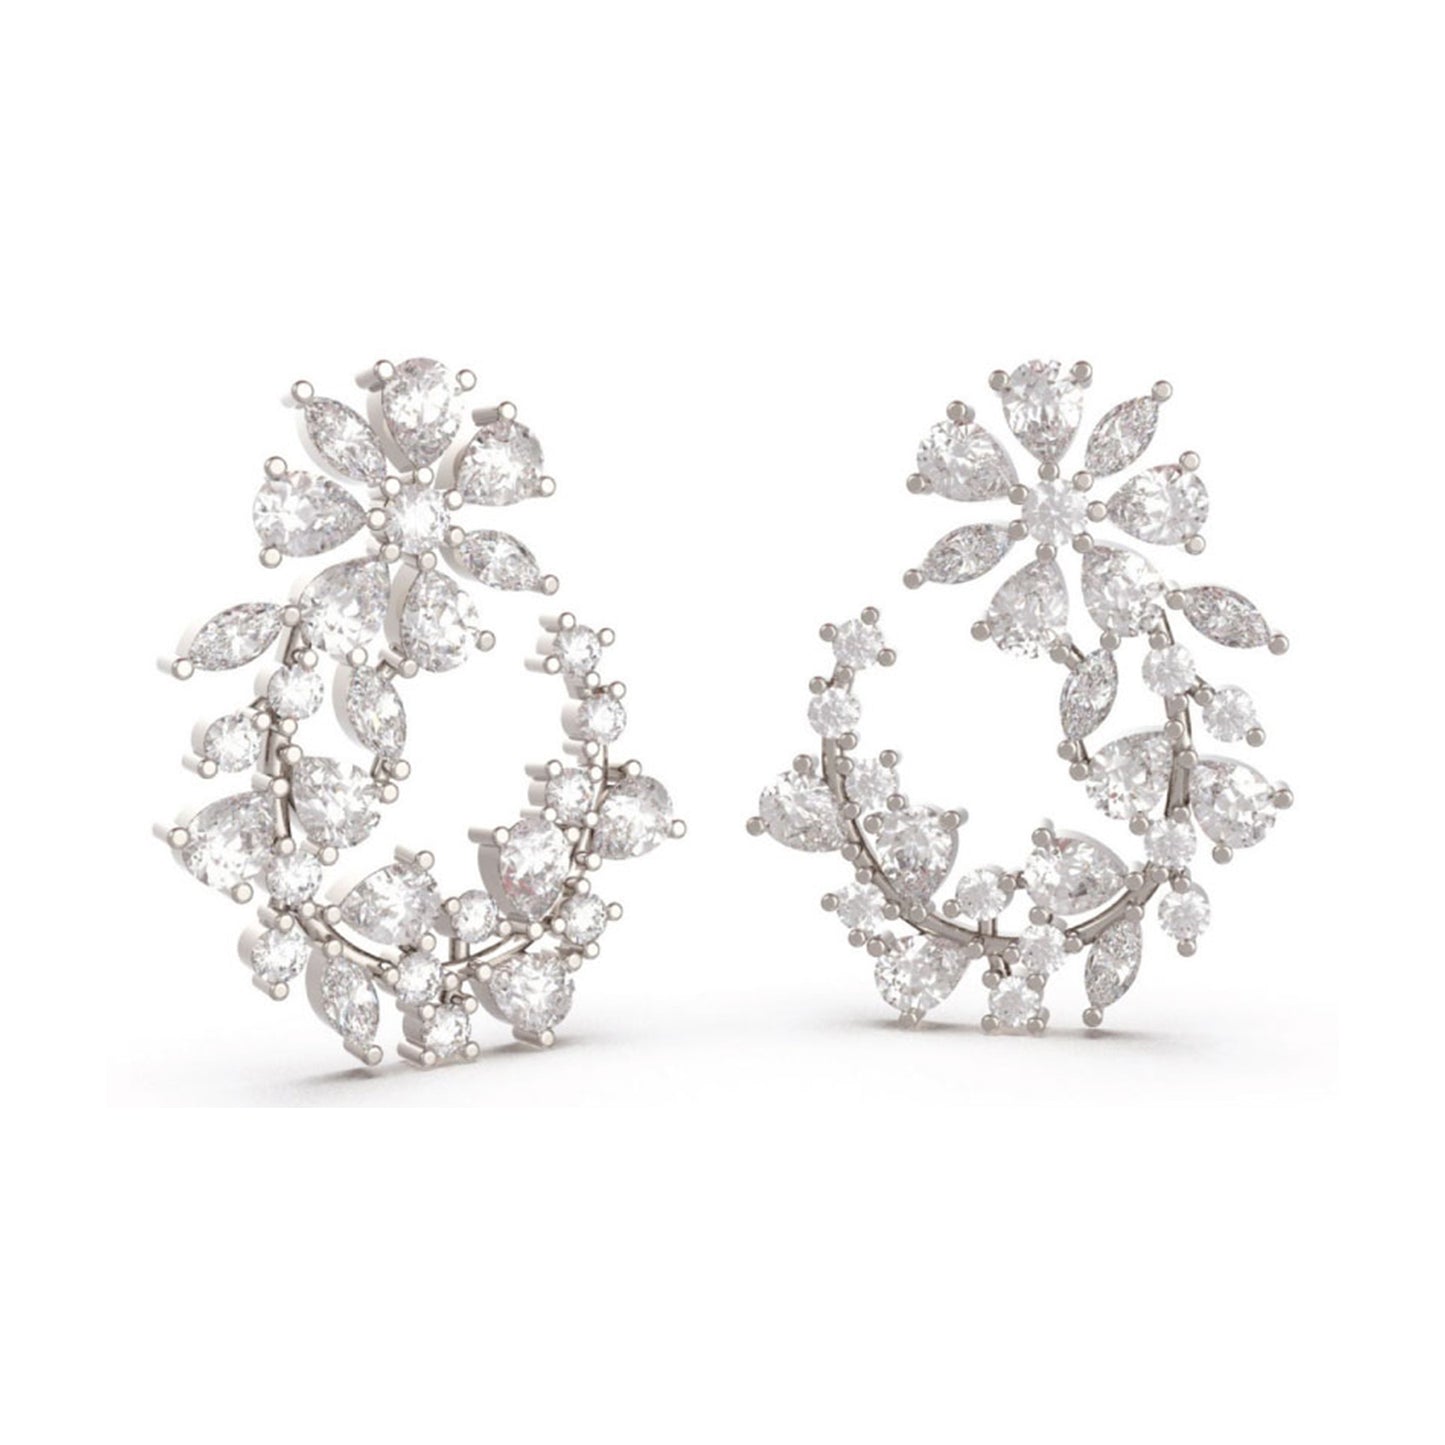 Delight Crystals Sparkling Stud Earrings